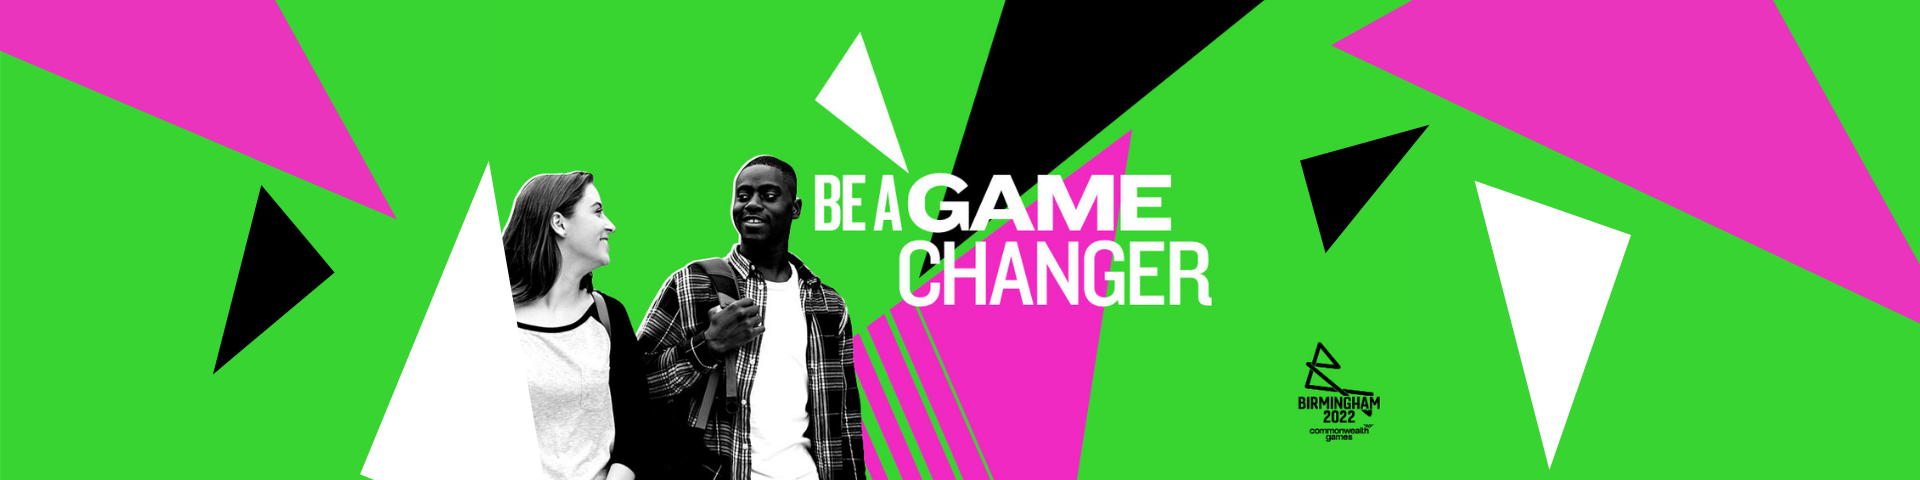 be a game changer